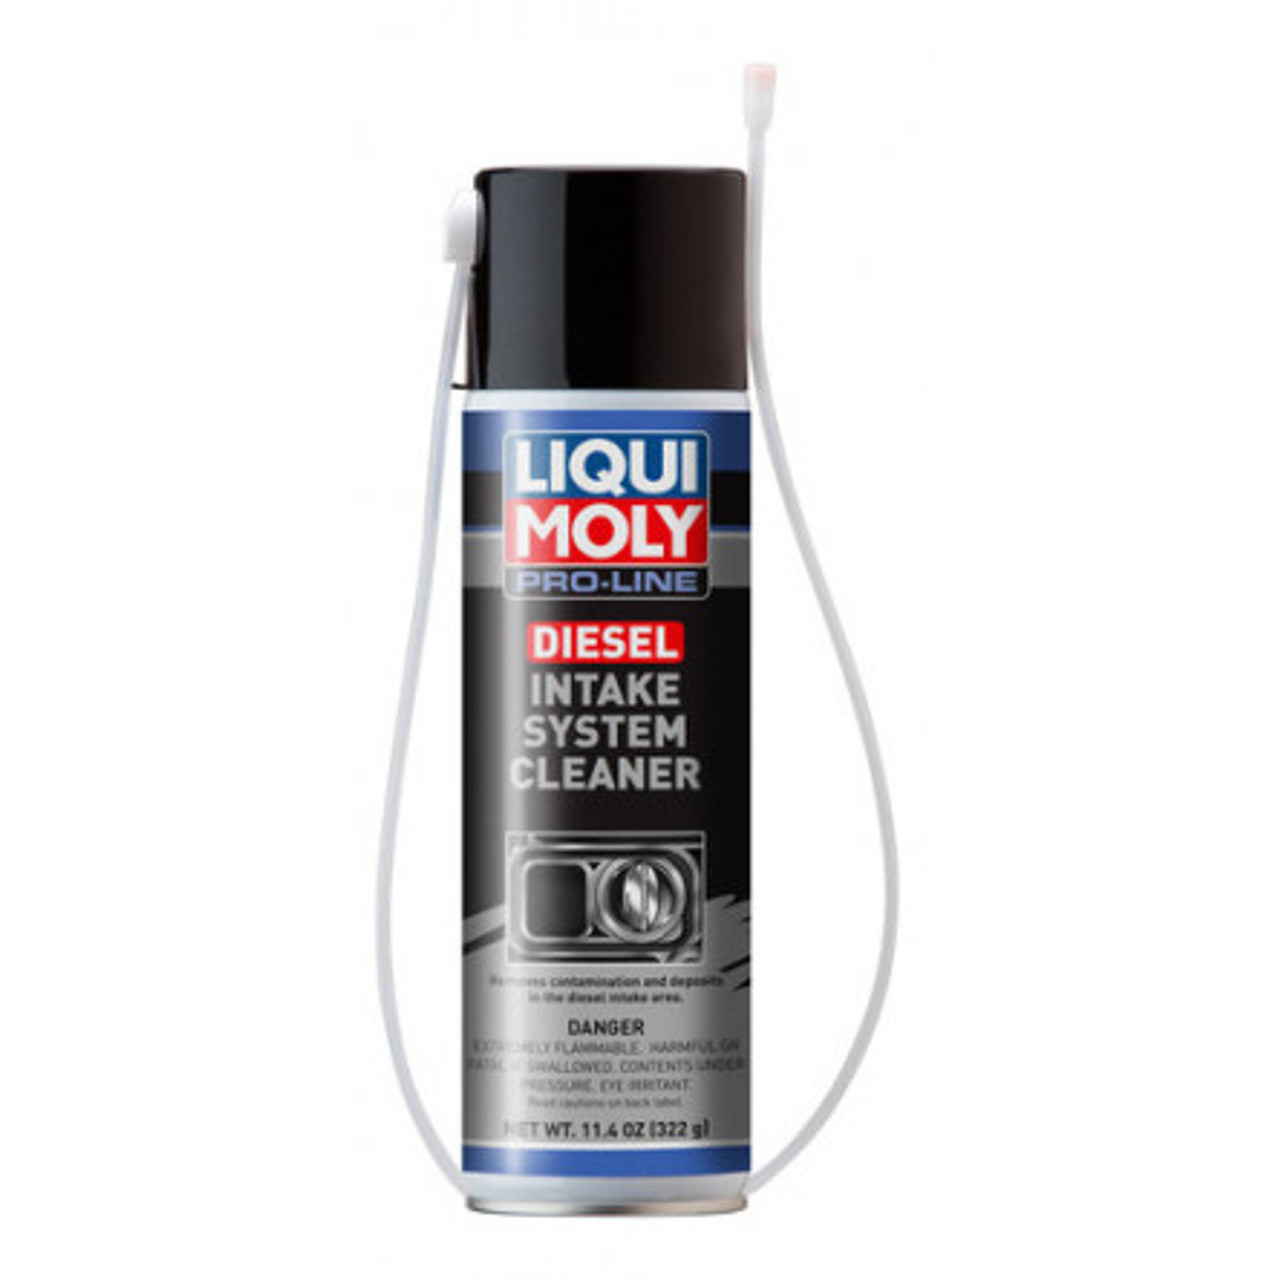 LIQUI MOLY 400mL Pro-Line Diesel Intake System Cleaner - Extreme Power House